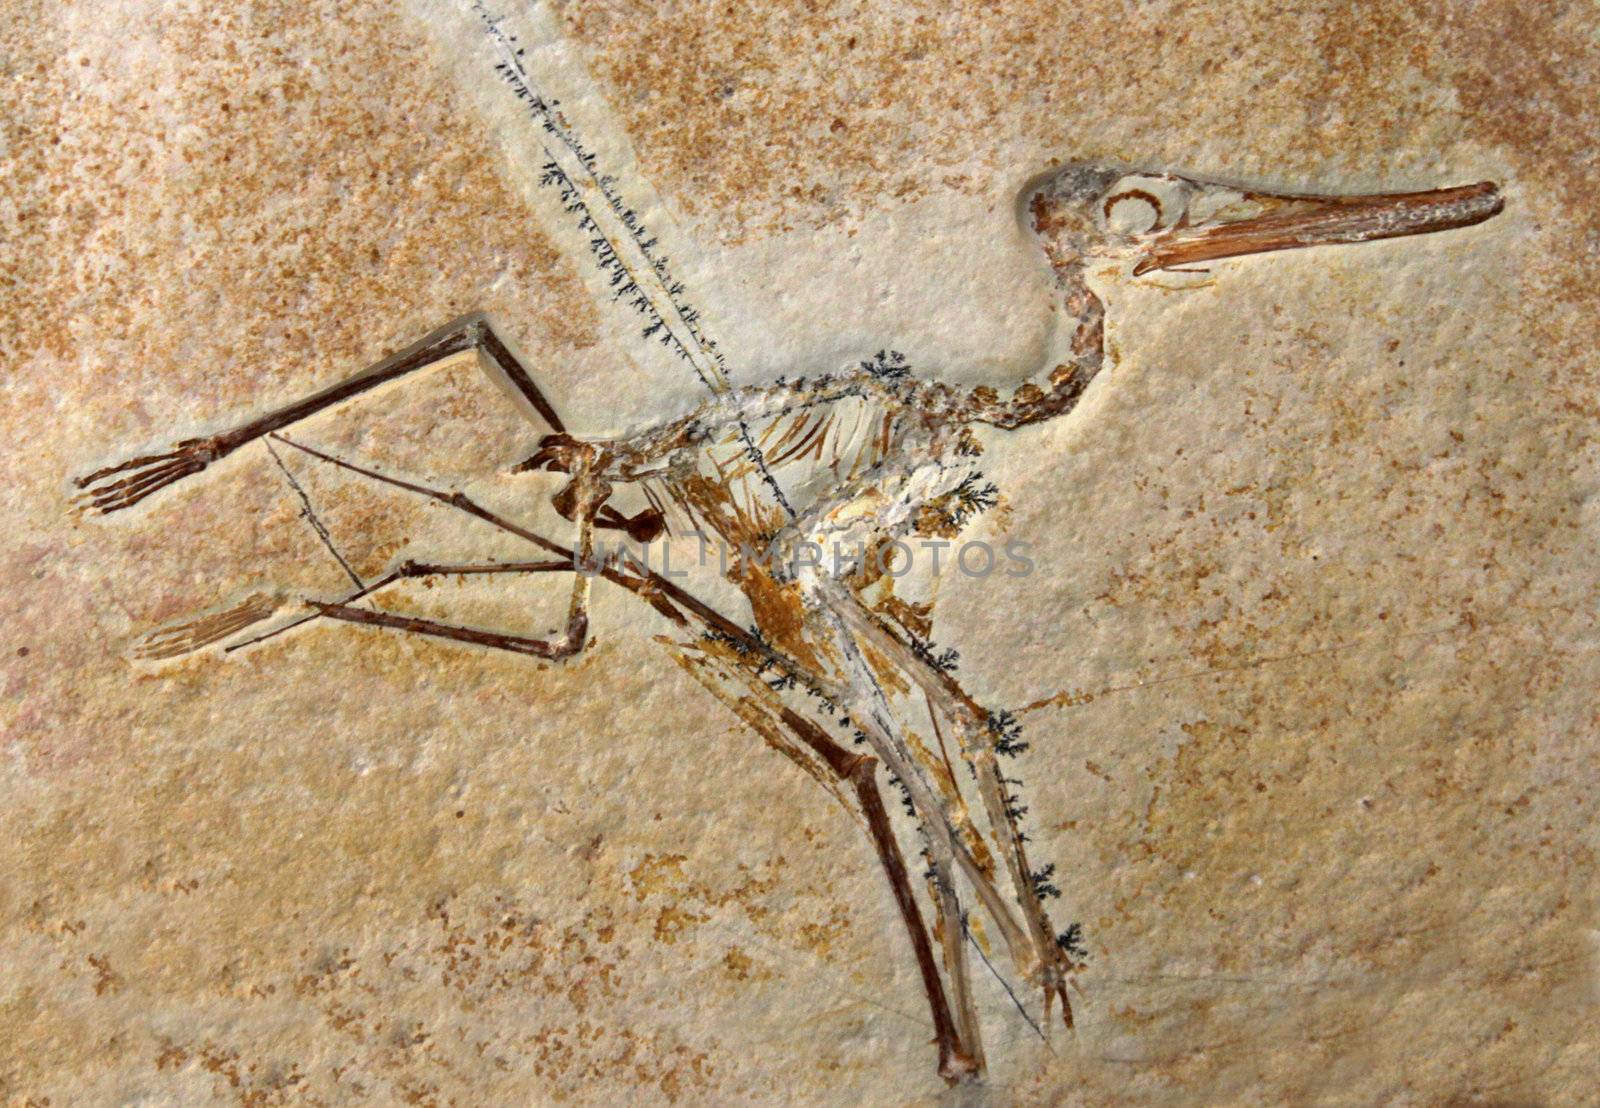 The fossil of a Pterodactylus Elegans dinosaur from the late Jurassic period. (148 million years old)